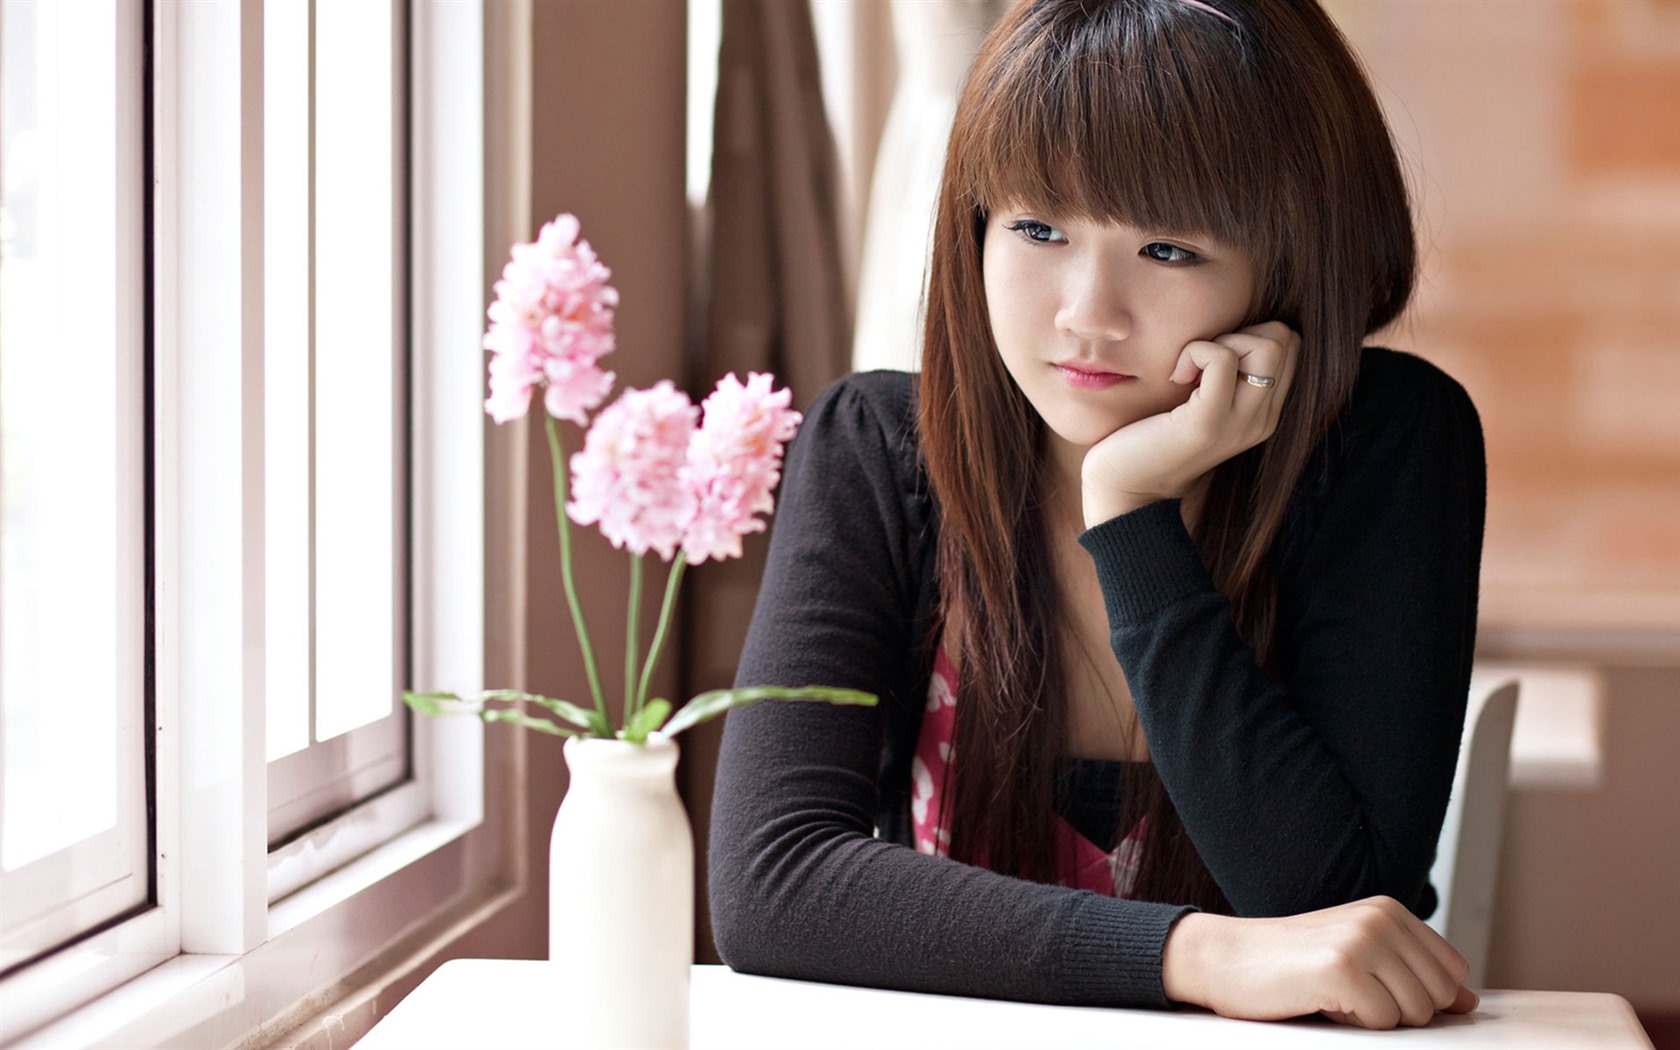 Pure and lovely young Asian girl HD wallpapers collection (2) #24 - 1680x1050